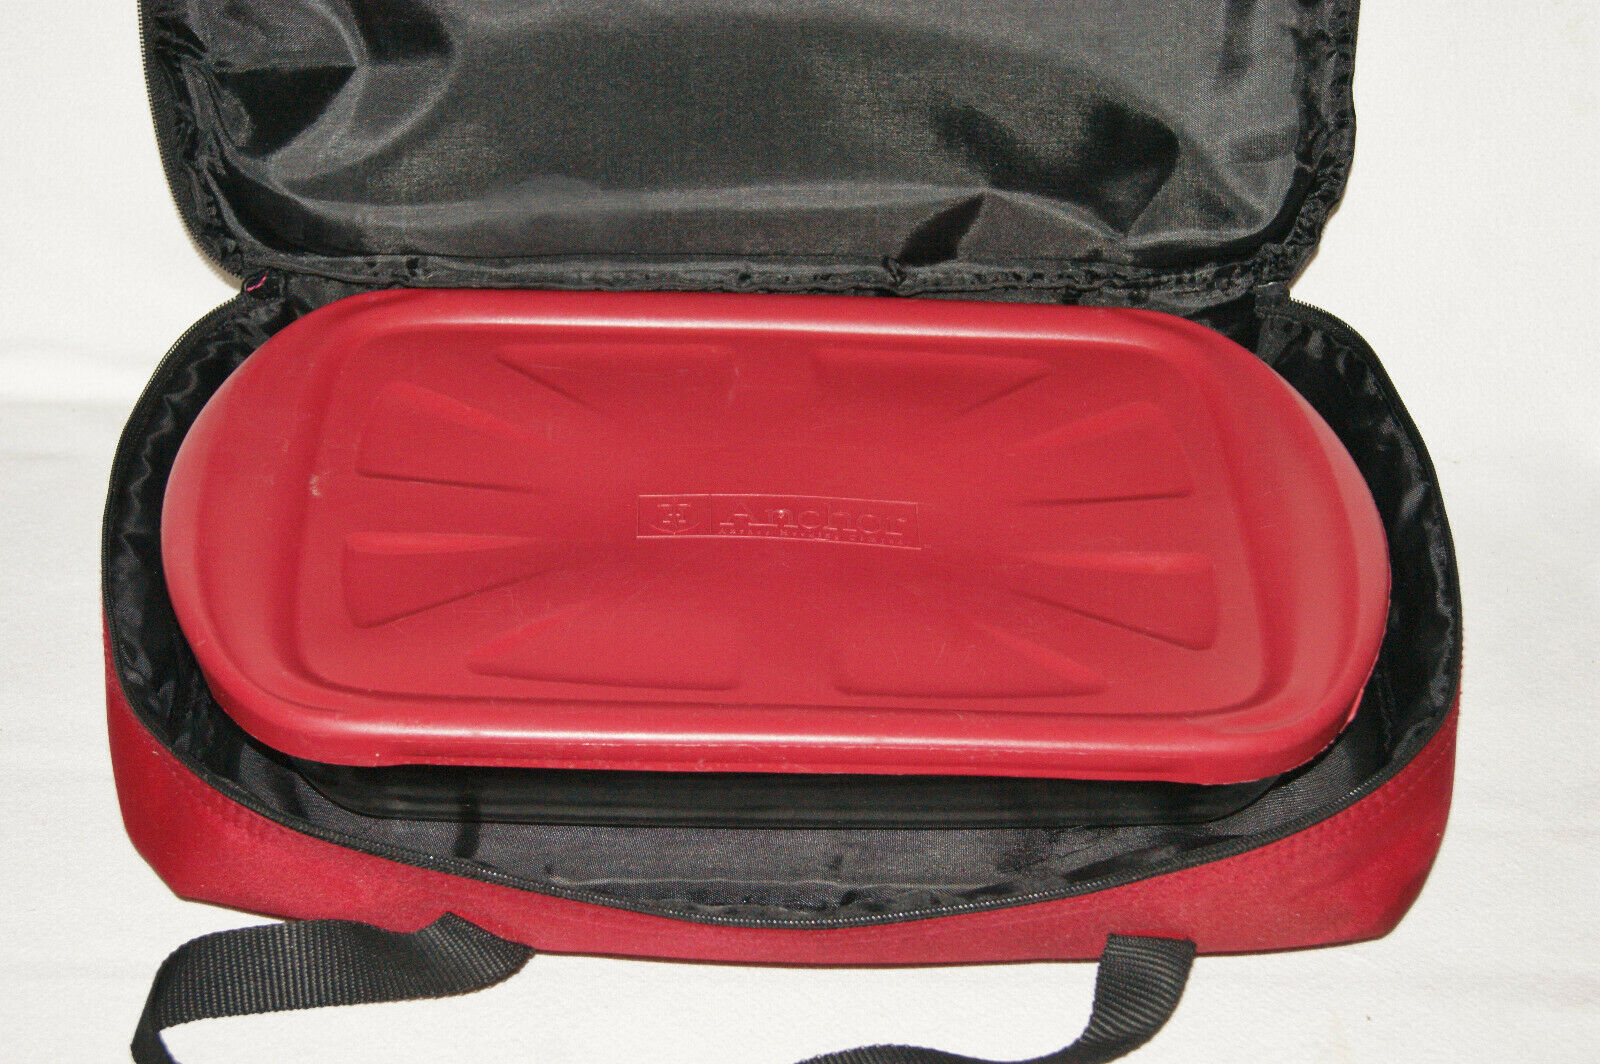 Anchor Hocking 3 Qt Casserole Dish Lid & Insulated Tote Carrying Case Bag 9 X 13